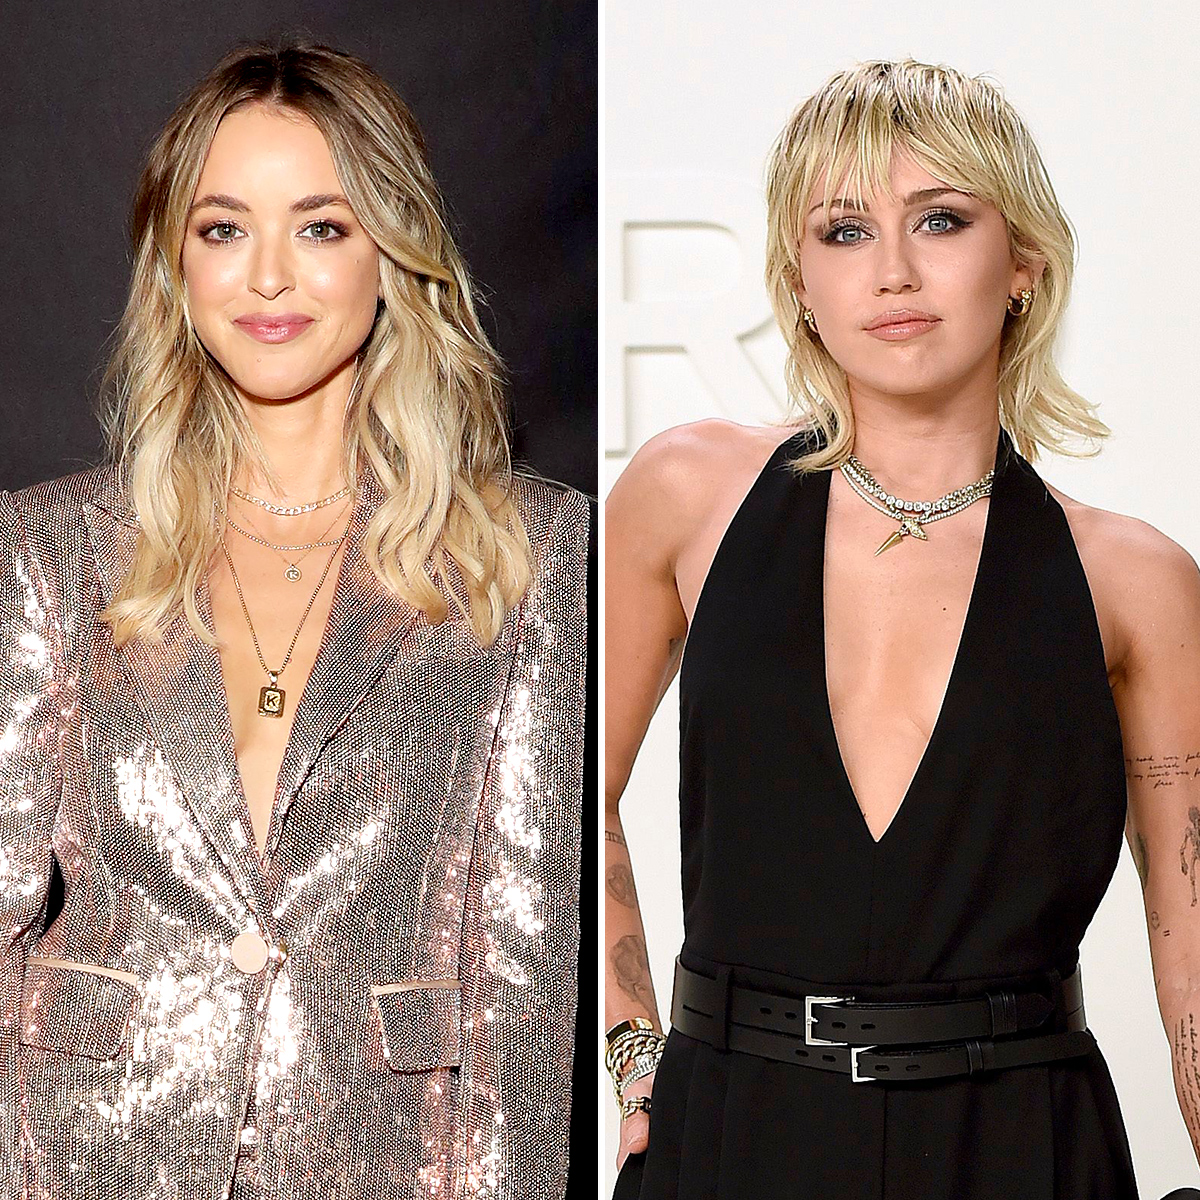 Kaitlynn Carter and Miley Cyrus Tried To Keep Relationship Private